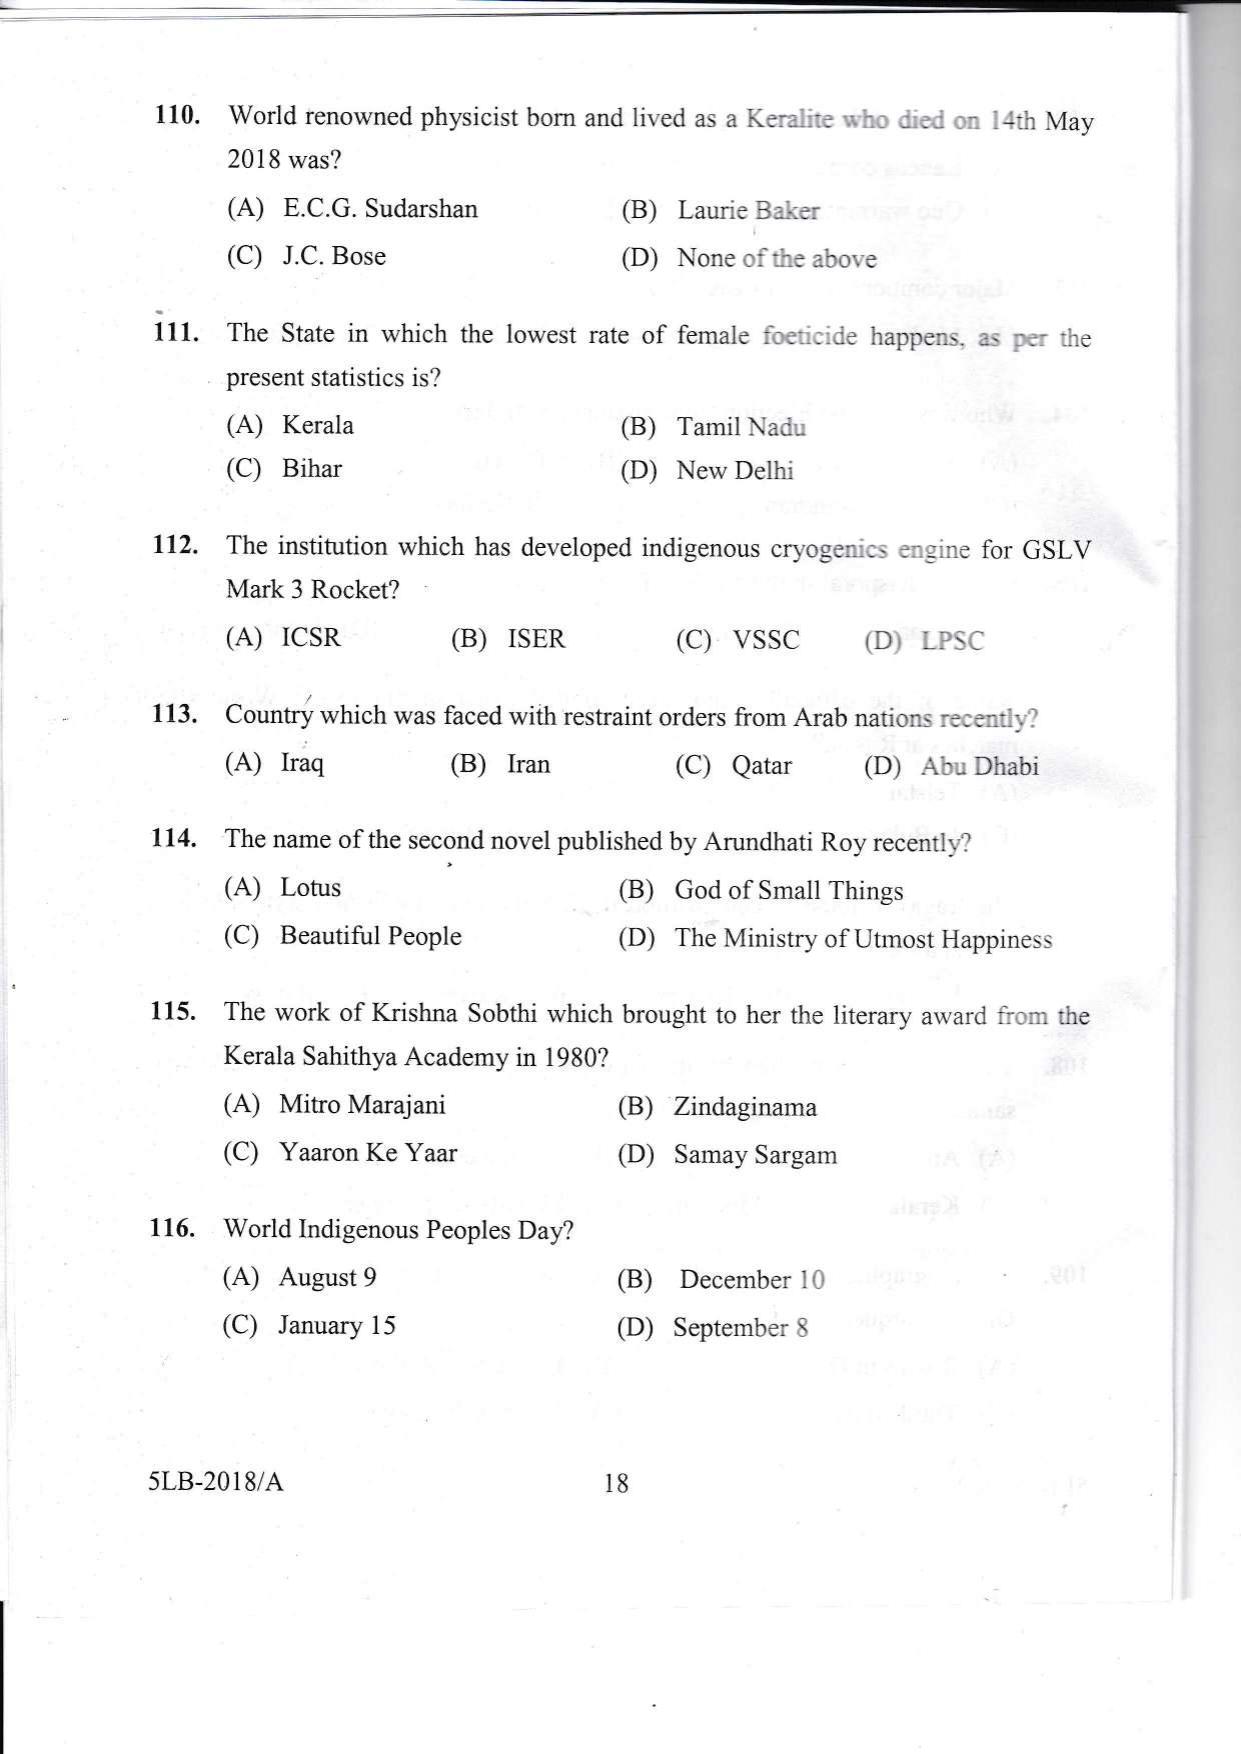 KLEE 5 Year LLB Exam 2018 Question Paper - Page 18